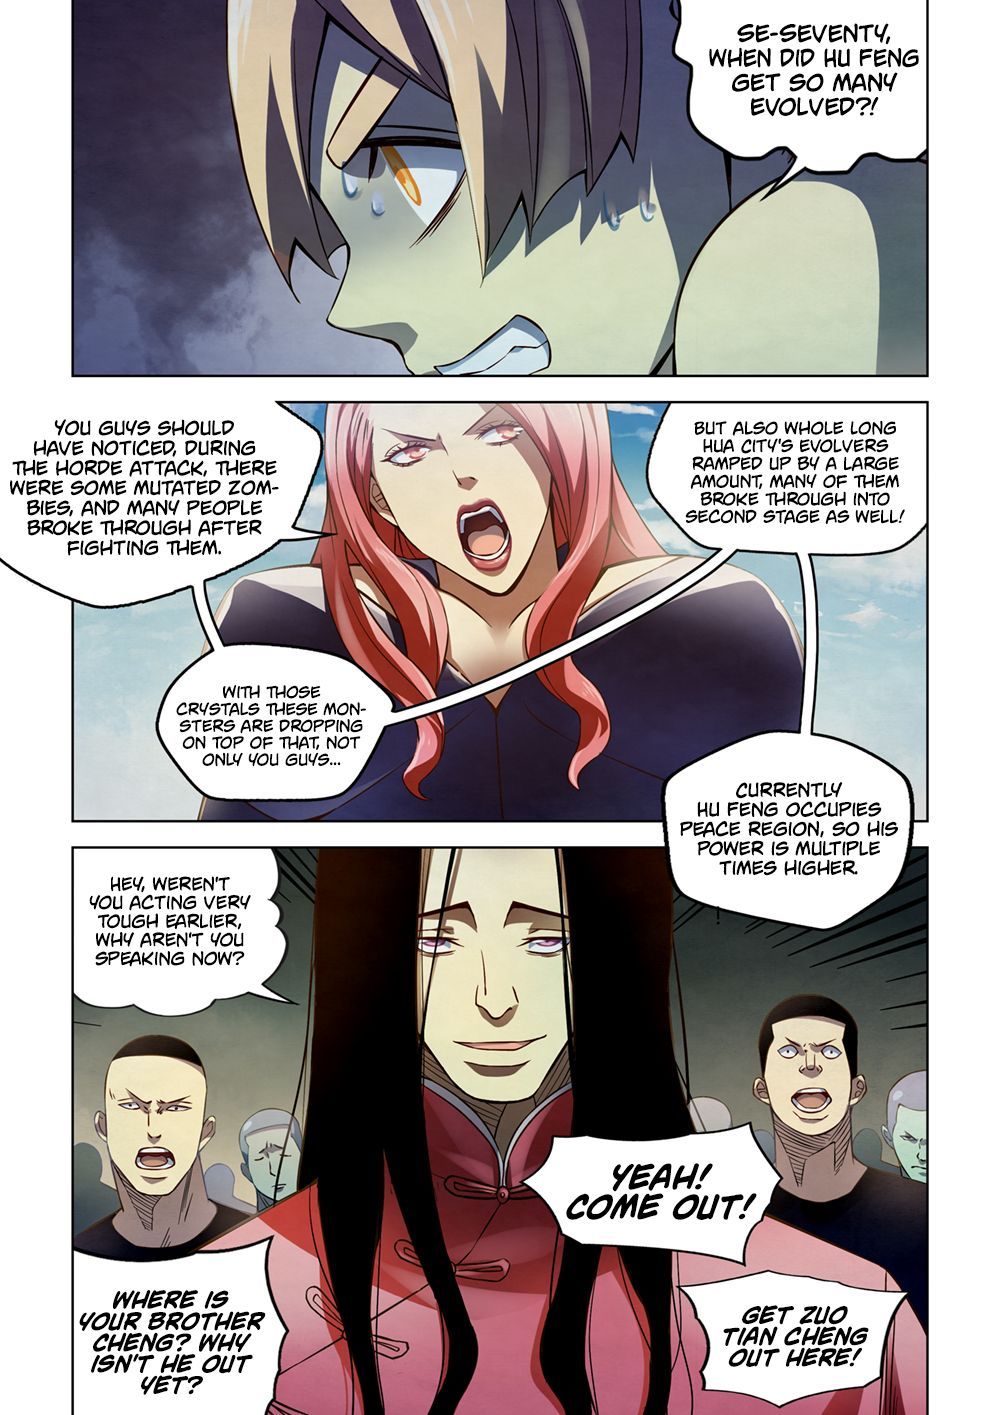 The Last Human Chapter 174 - Page 10